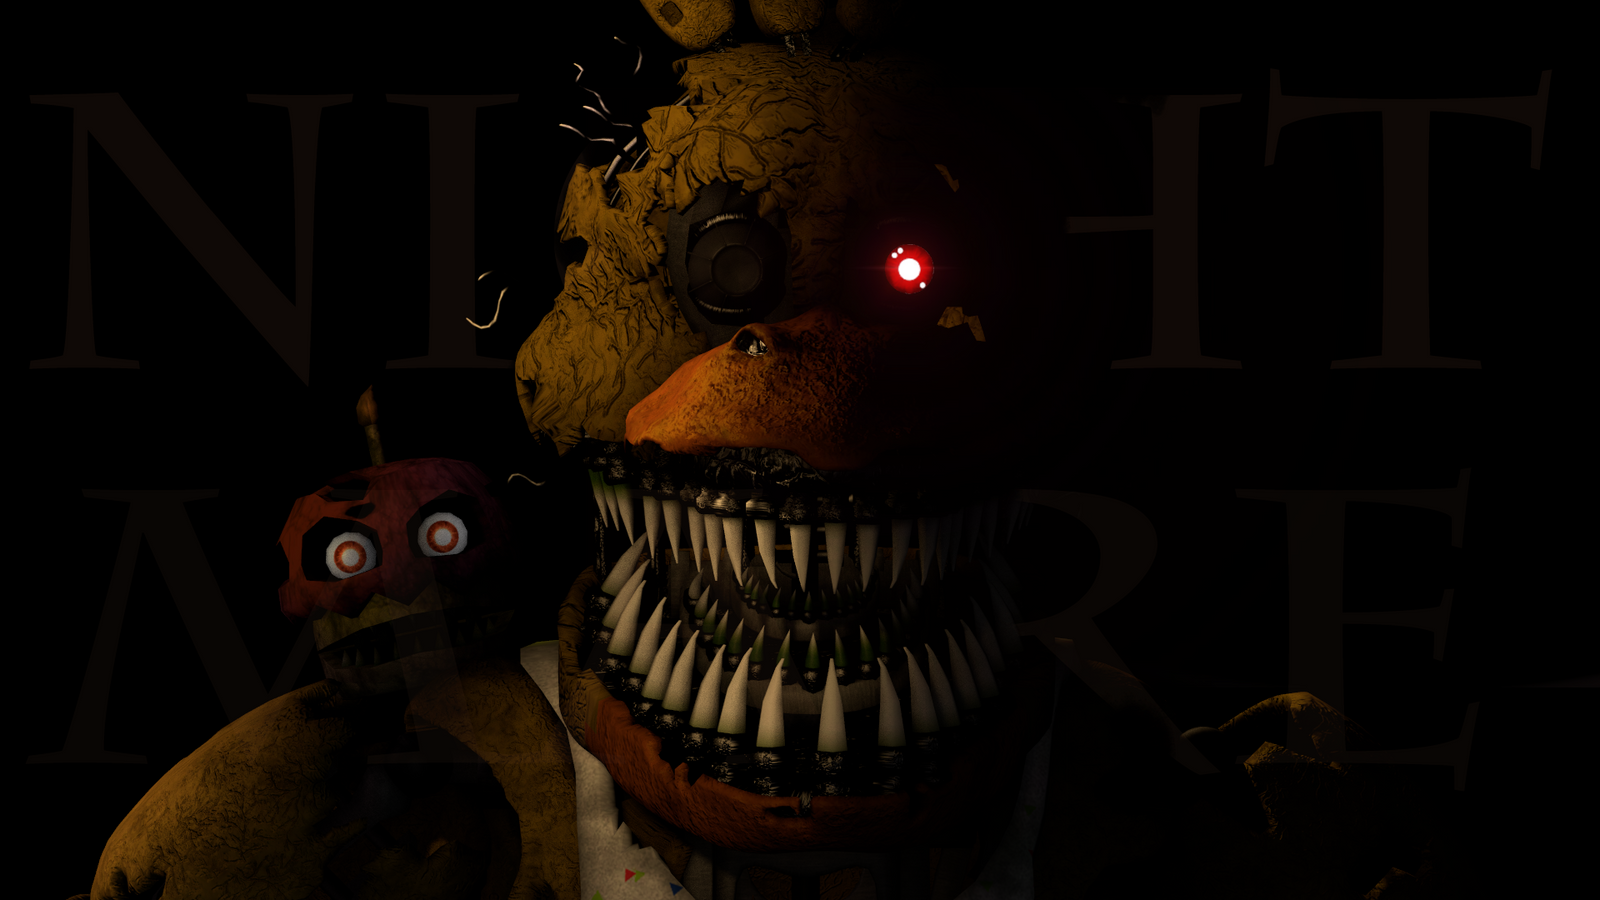 1 nightmare chica (five nights at freddy's) hd wallpapers on nightmare chica wallpapers